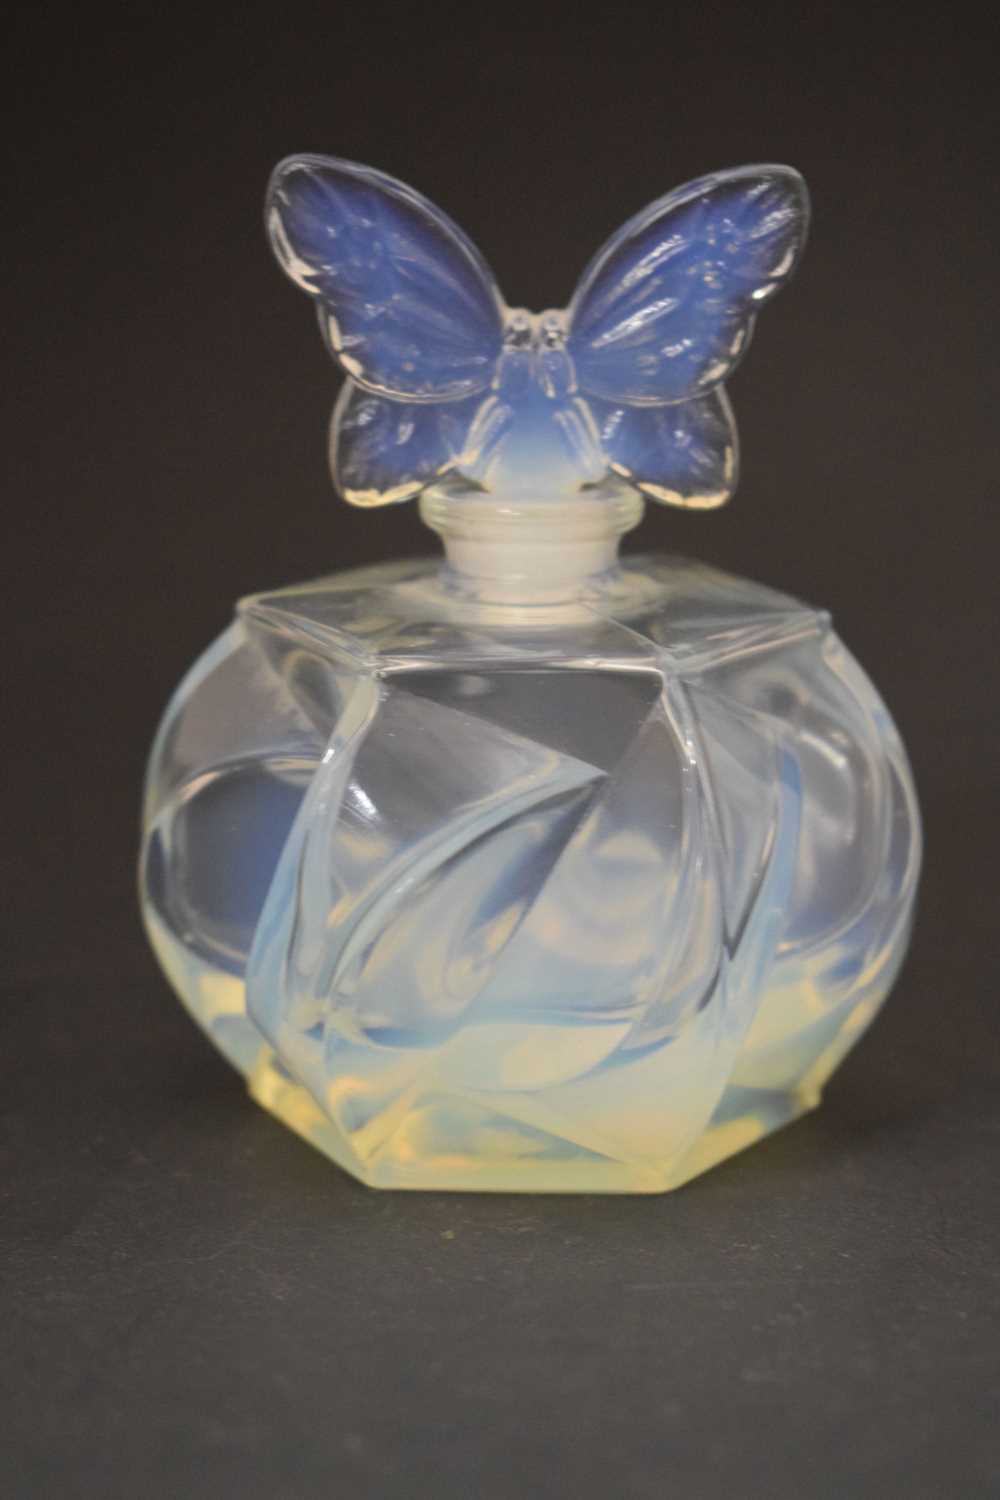 Lalique - Dragonfly paperweight, together with a Nina Ricci scent bottle - Image 8 of 11